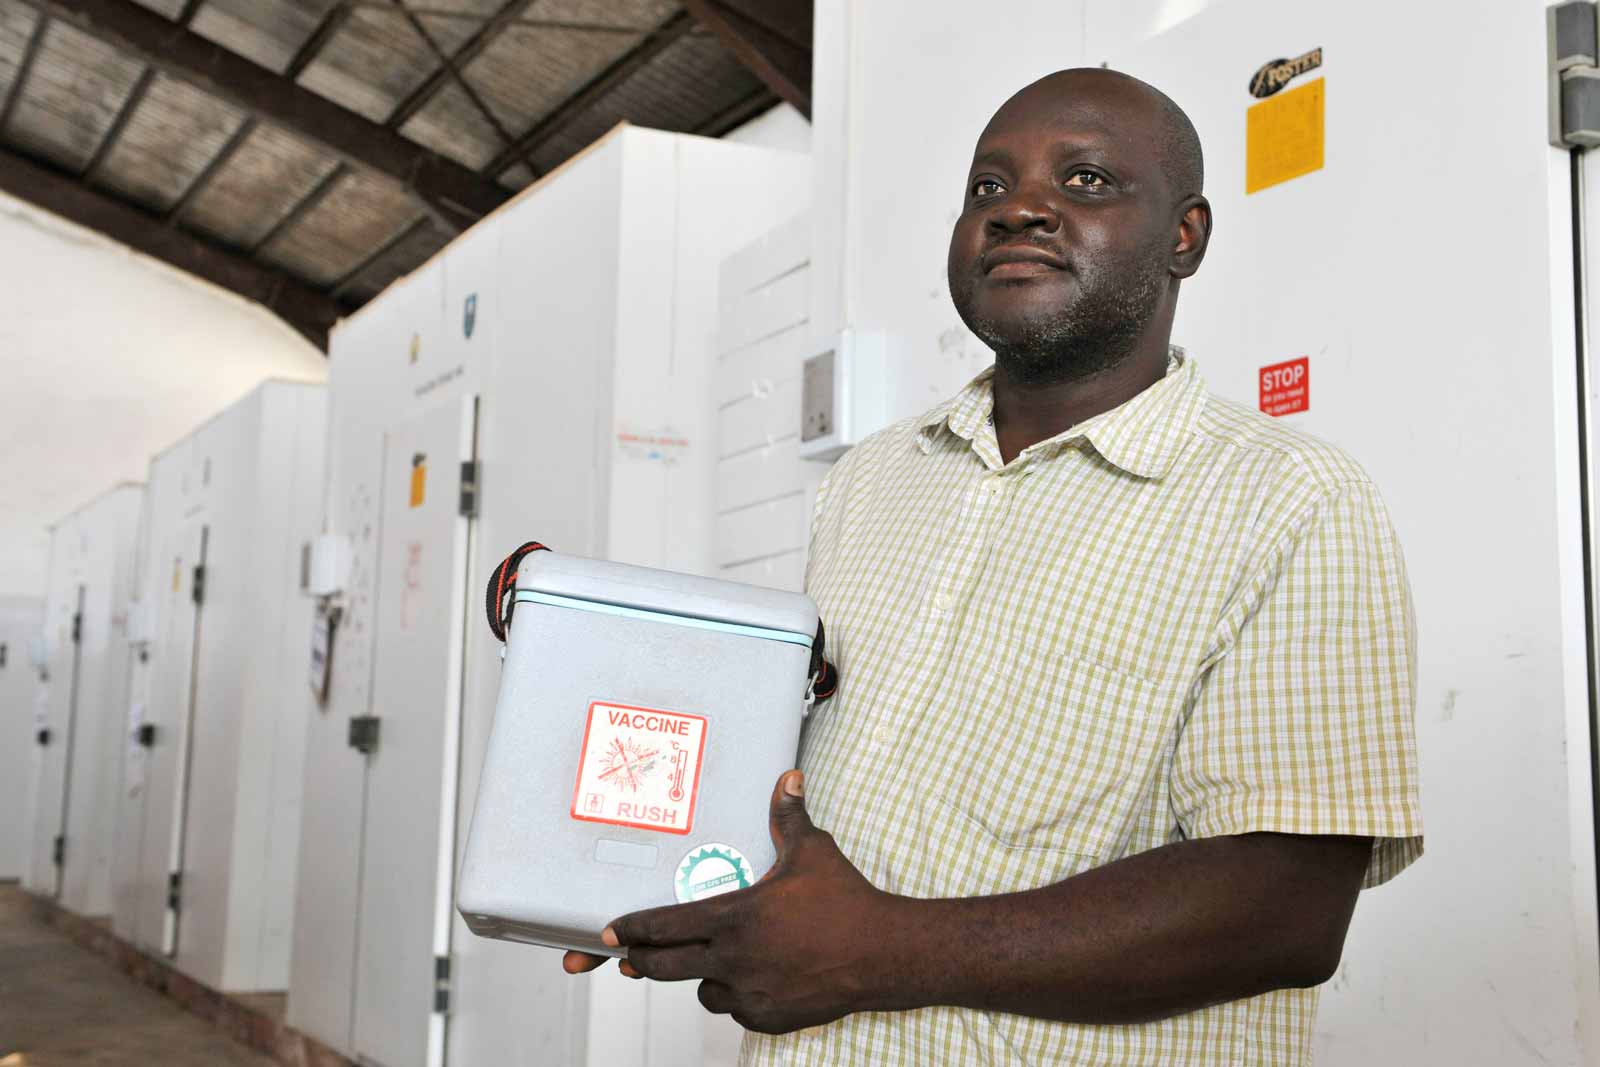  Onojo Otowo, 43, Chief of Vaccines Security Distribution at the National Cold Storage Centre in Abuja, shows the cooler used by vaccine outreach workers. The centre, which contains 73,000 litres of refrigerated storage space, distributes vaccines to all Nigeria’s state health ministries.Some US$ 158 million worth of vaccines pass through the storage centre each year, but it remains at continual risk of power outages.